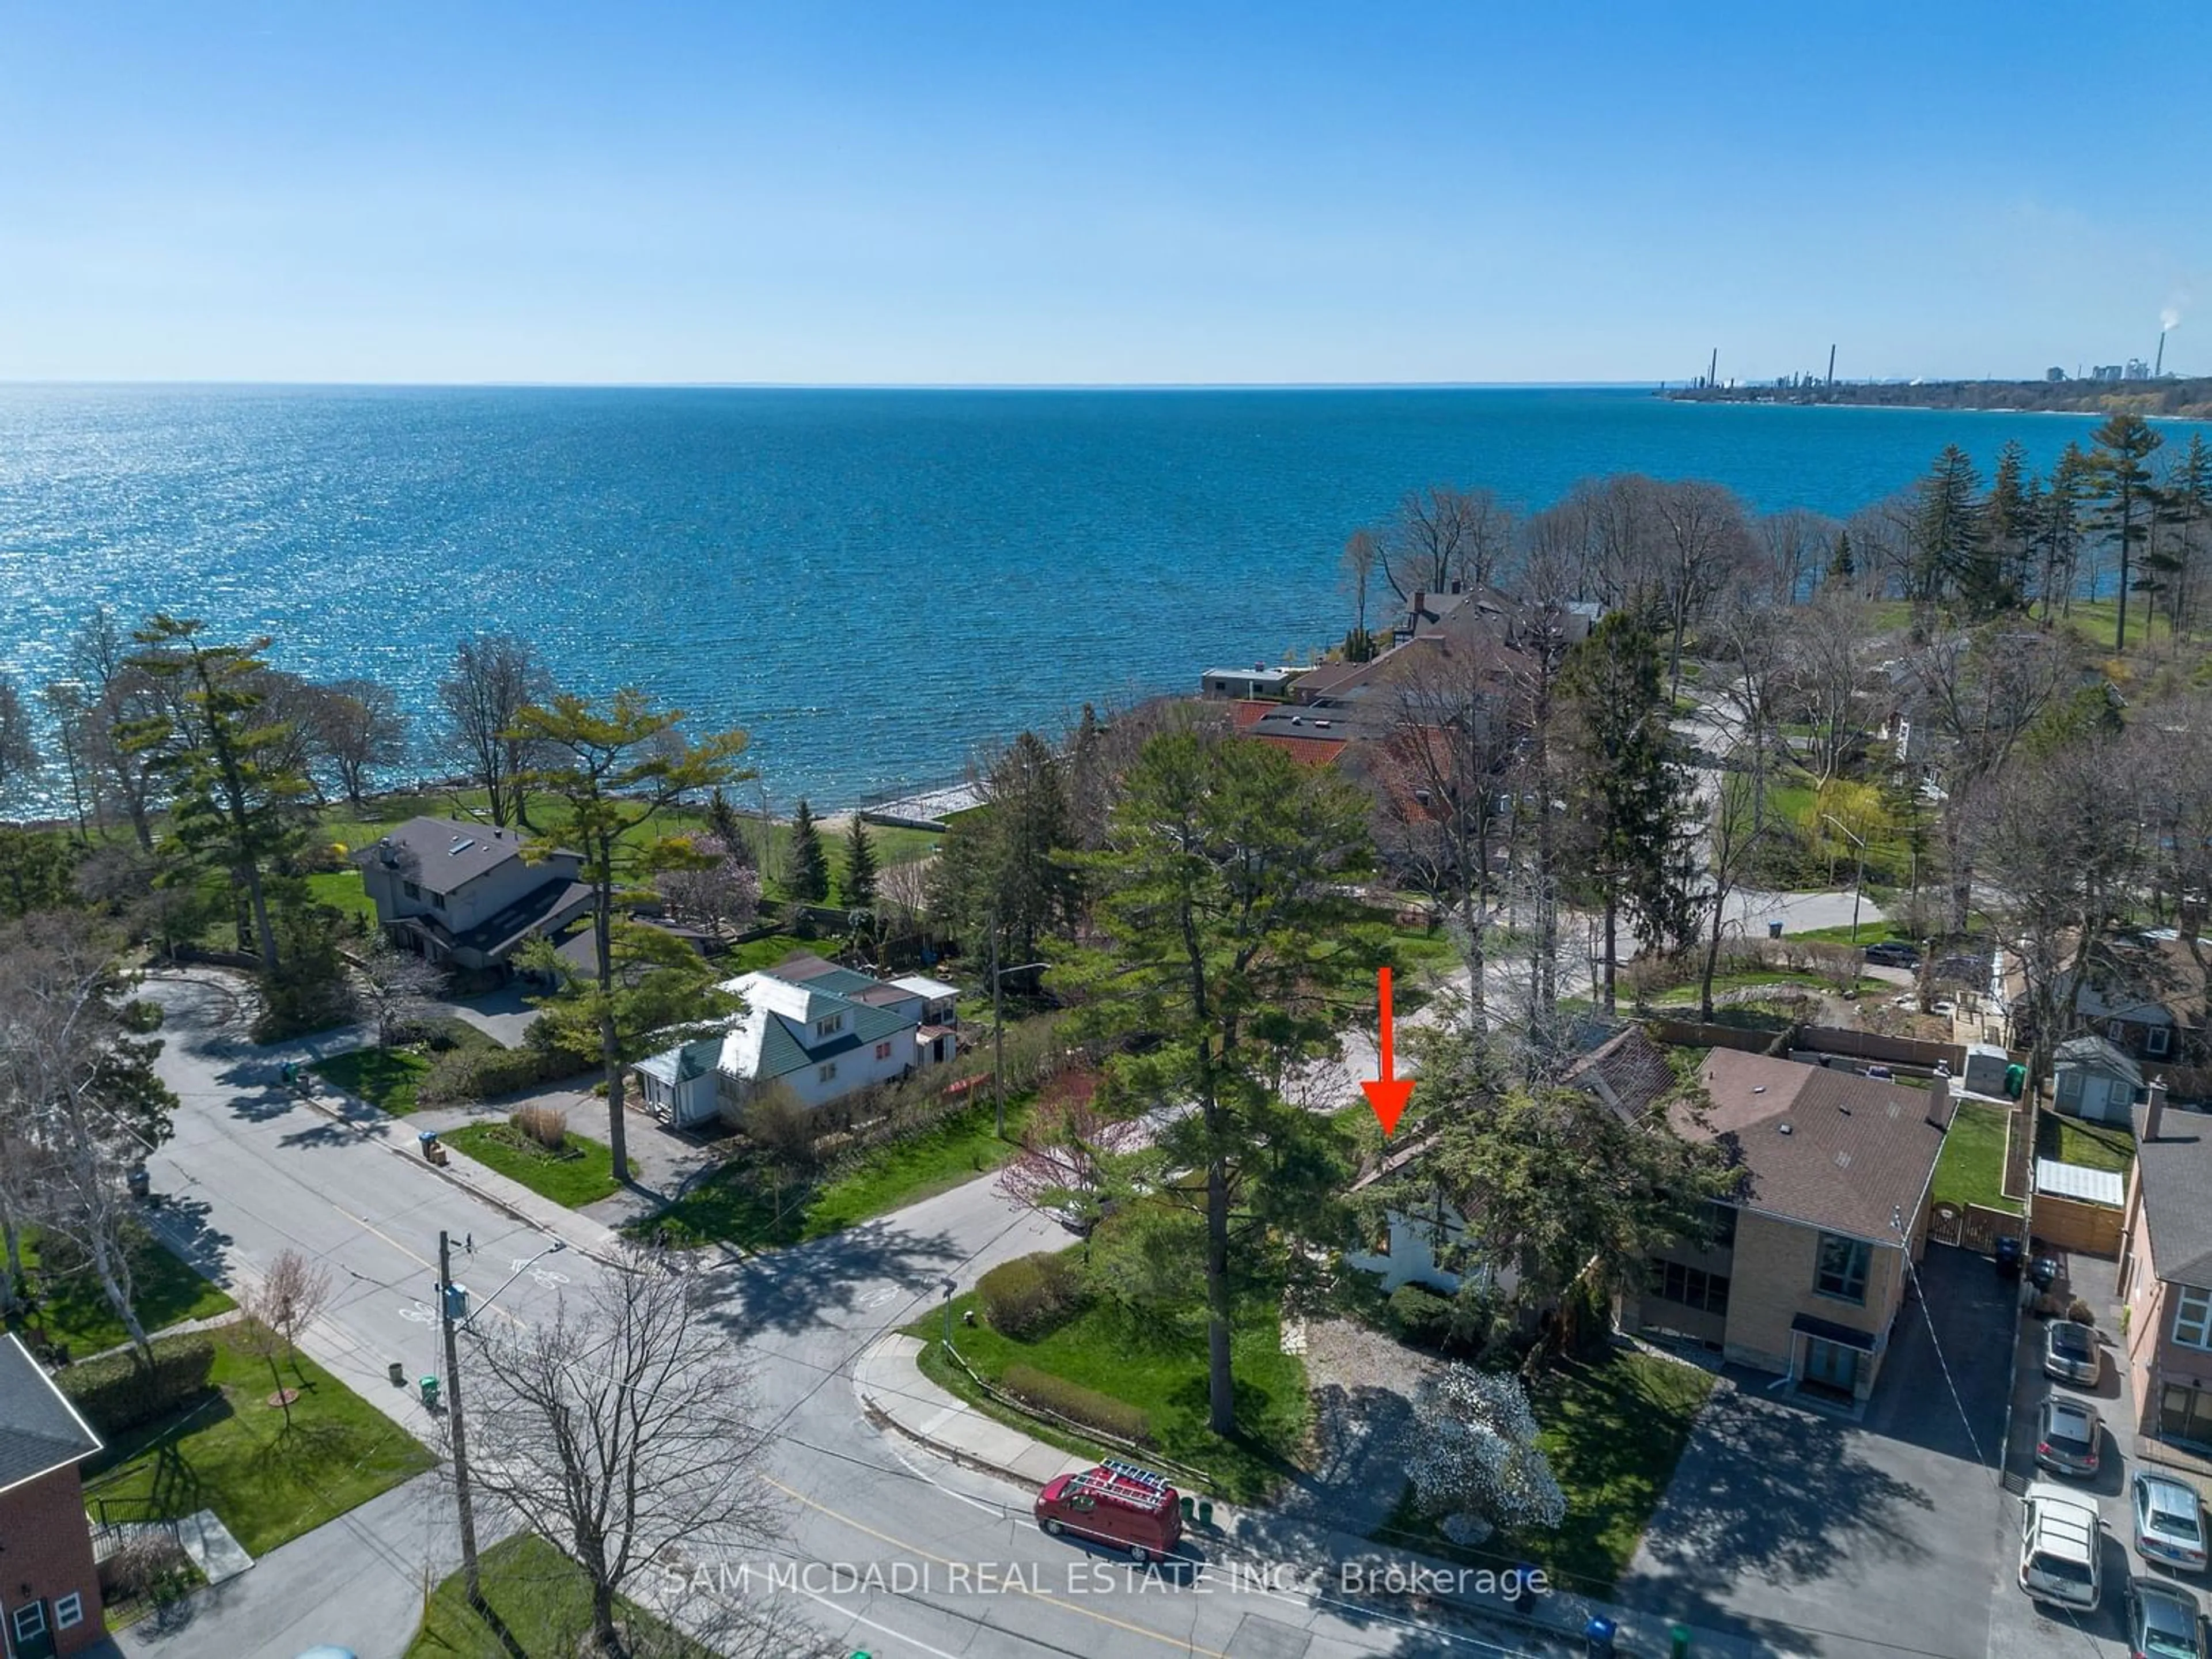 Lakeview for 62 Maple Ave, Mississauga Ontario L5H 2R6